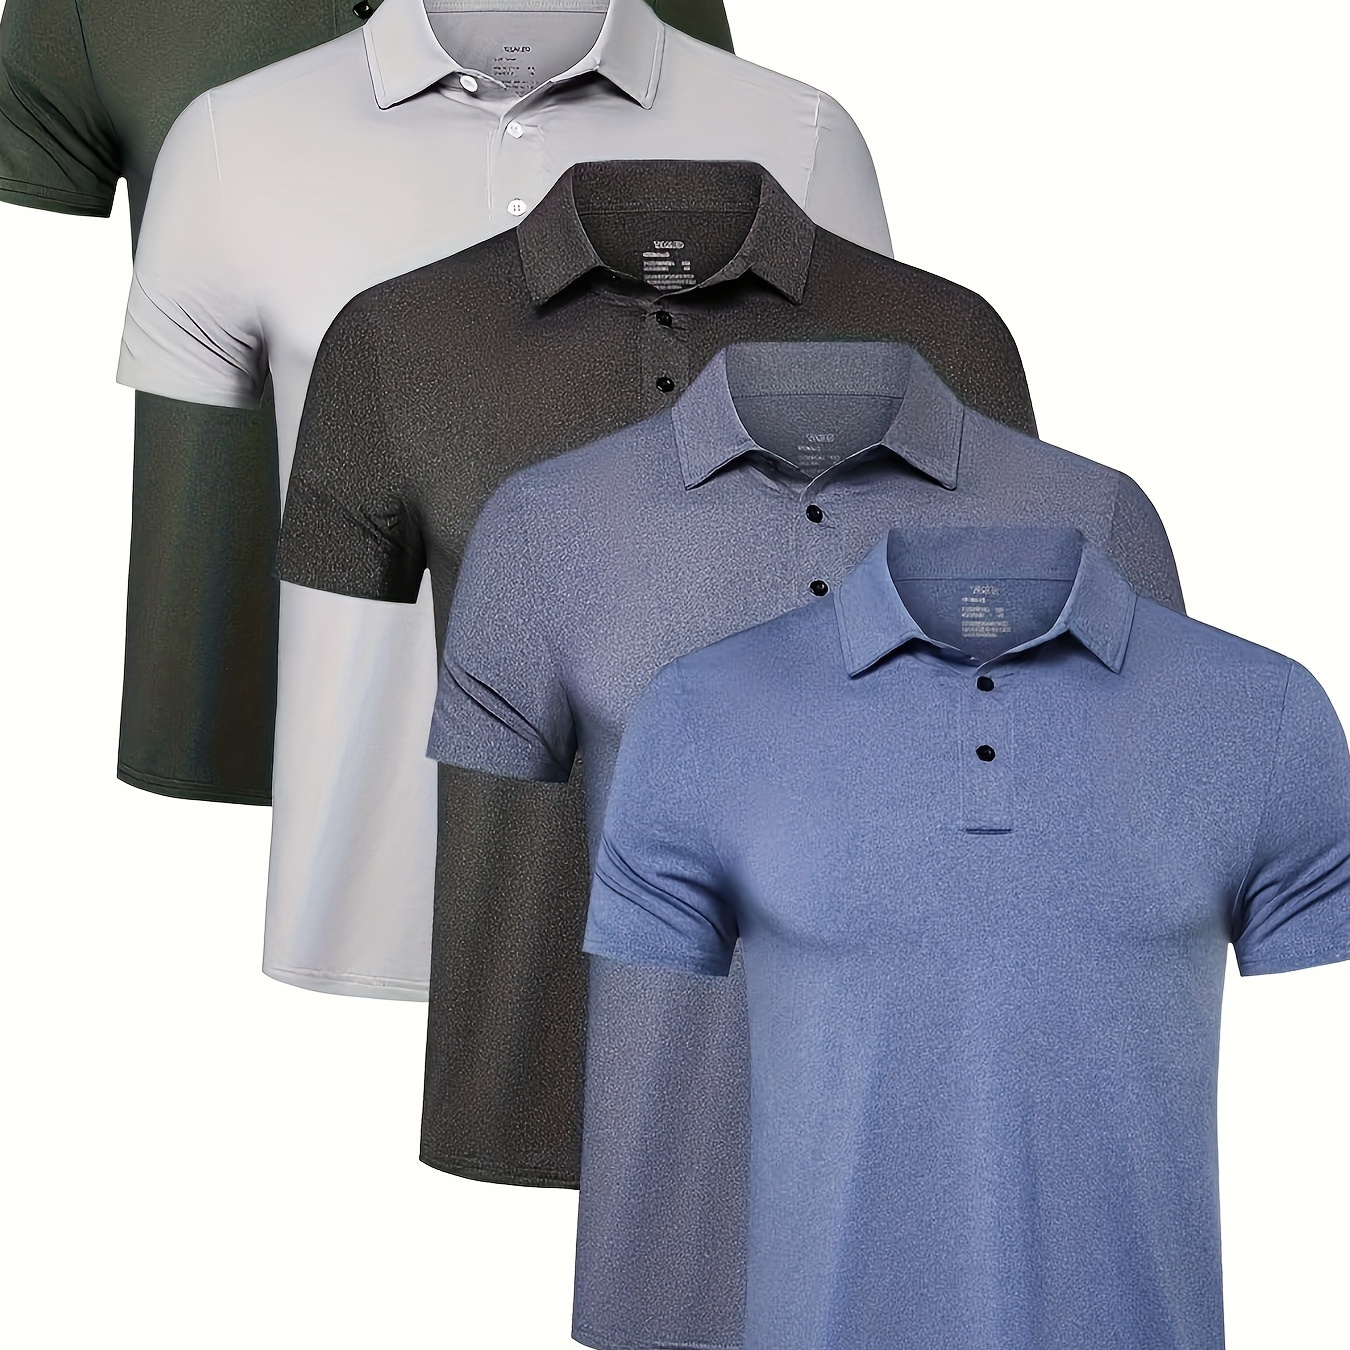 

5-pack Men's Shirts Quick Dry Performance Short Sleeve Golf T-shirts - Moisture Wicking Casual Workout Tops